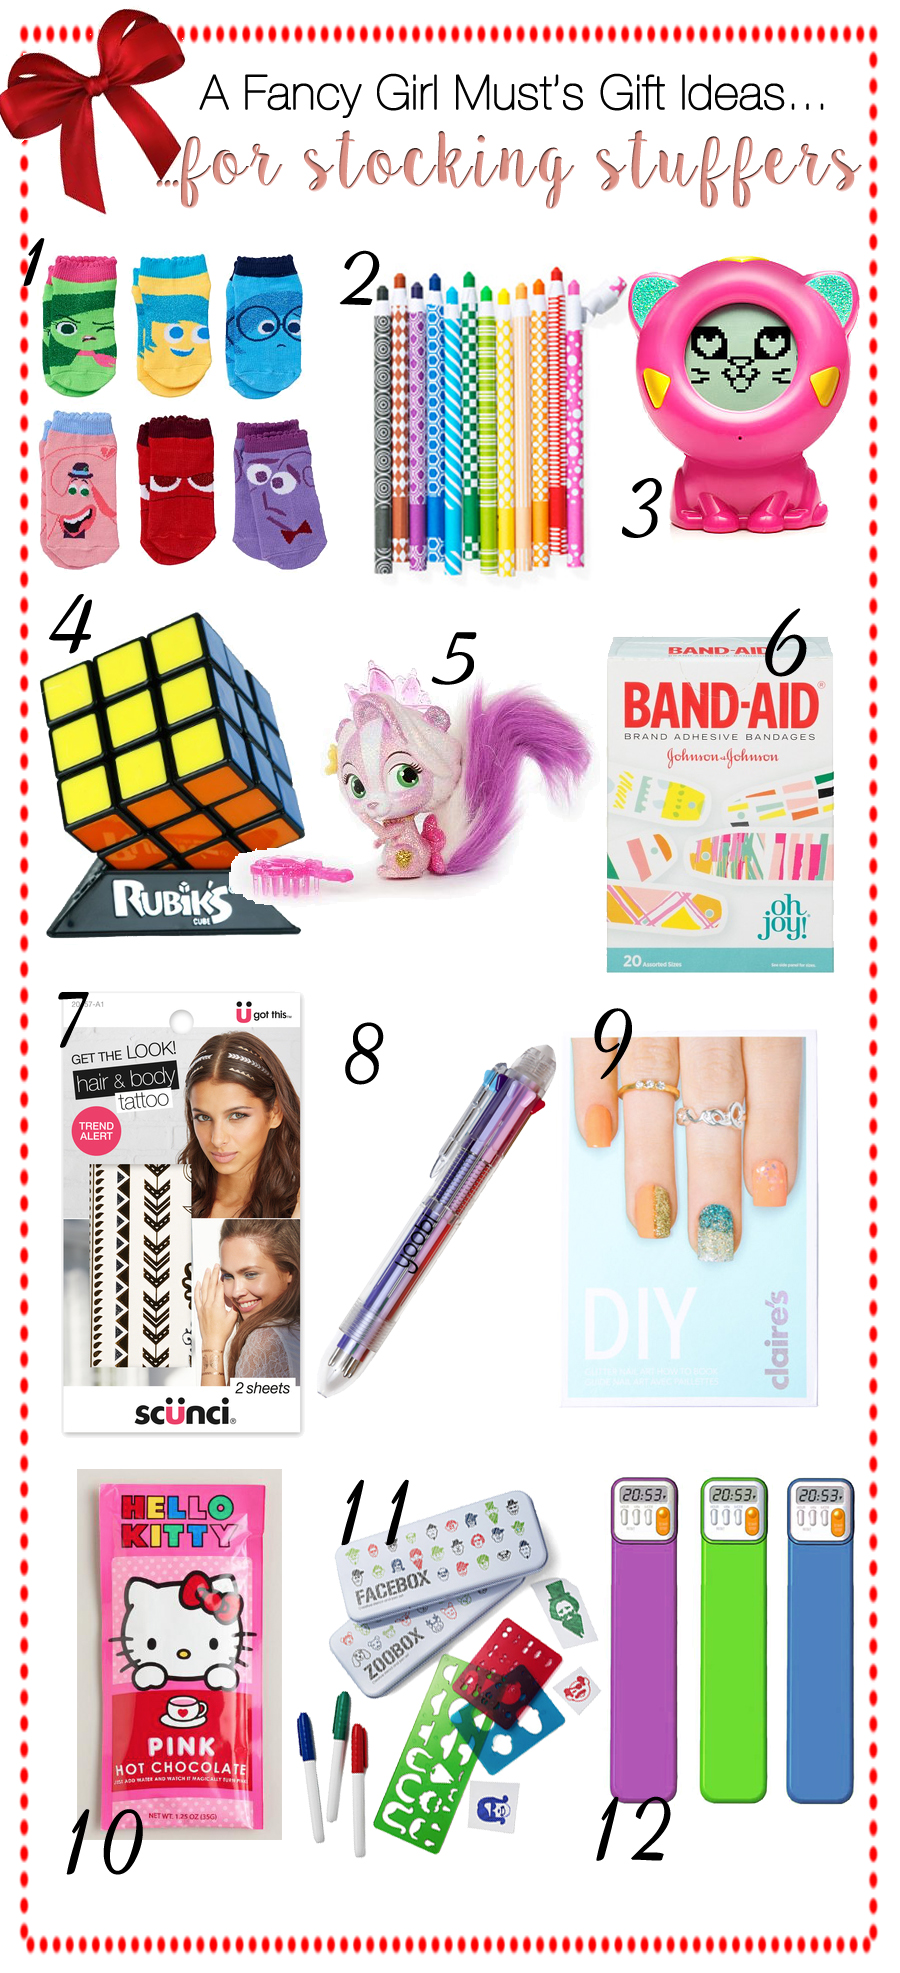 2015 Holiday Gift Guide: 12 Stocking Stuffers for Girls